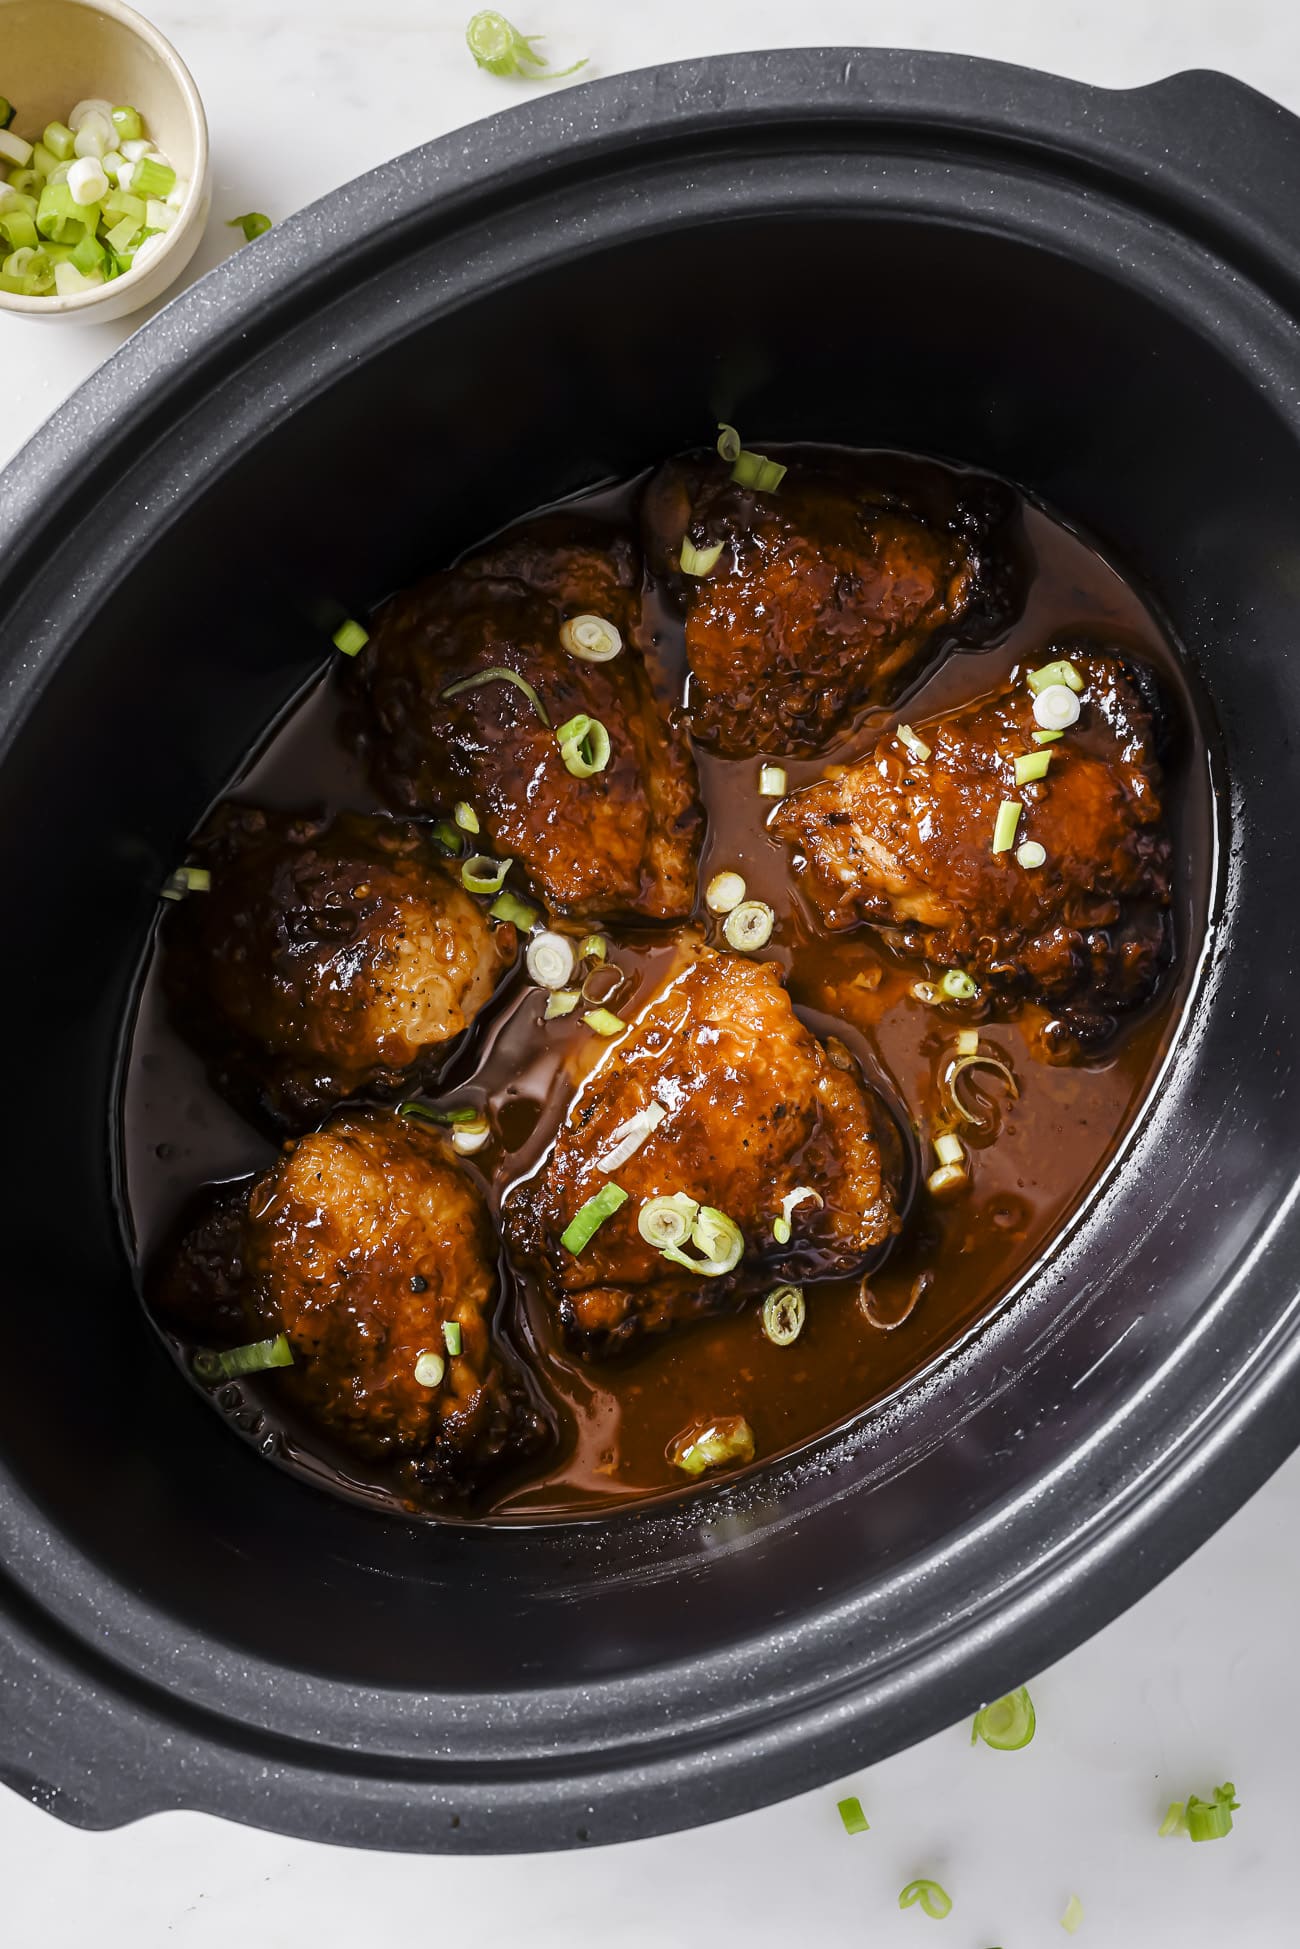 Chicken thighs in the slow cooker with sliced green onions.